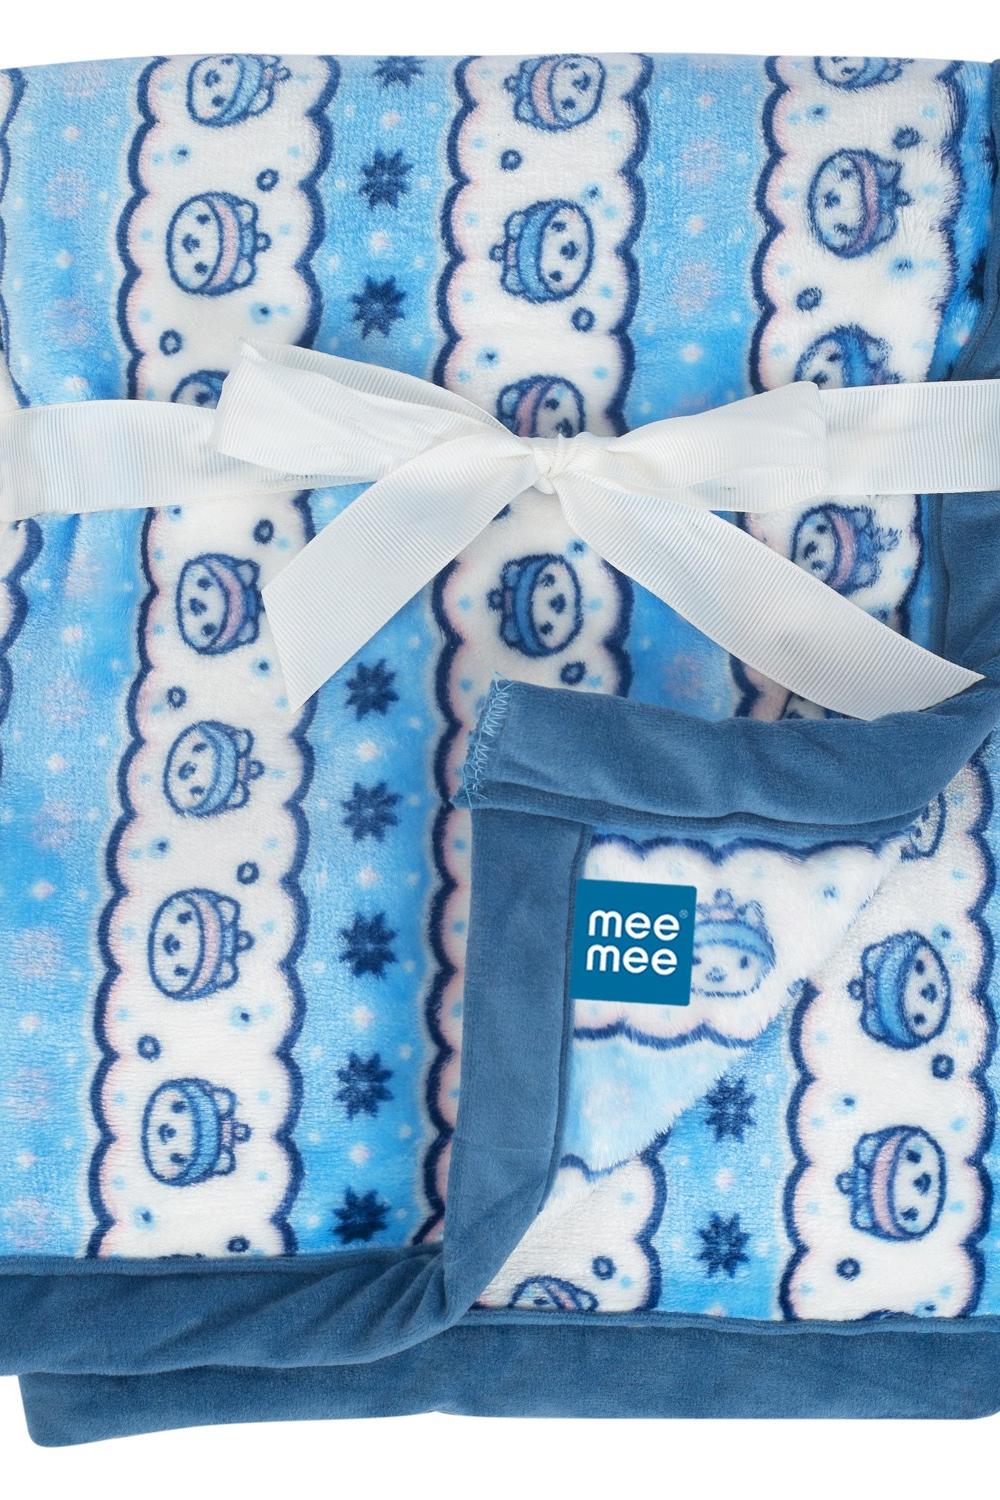 Mee Mee Soft, Comfortable Baby Blanket for Infant and Toddler (Double Layered, Puppy Print-Blue)